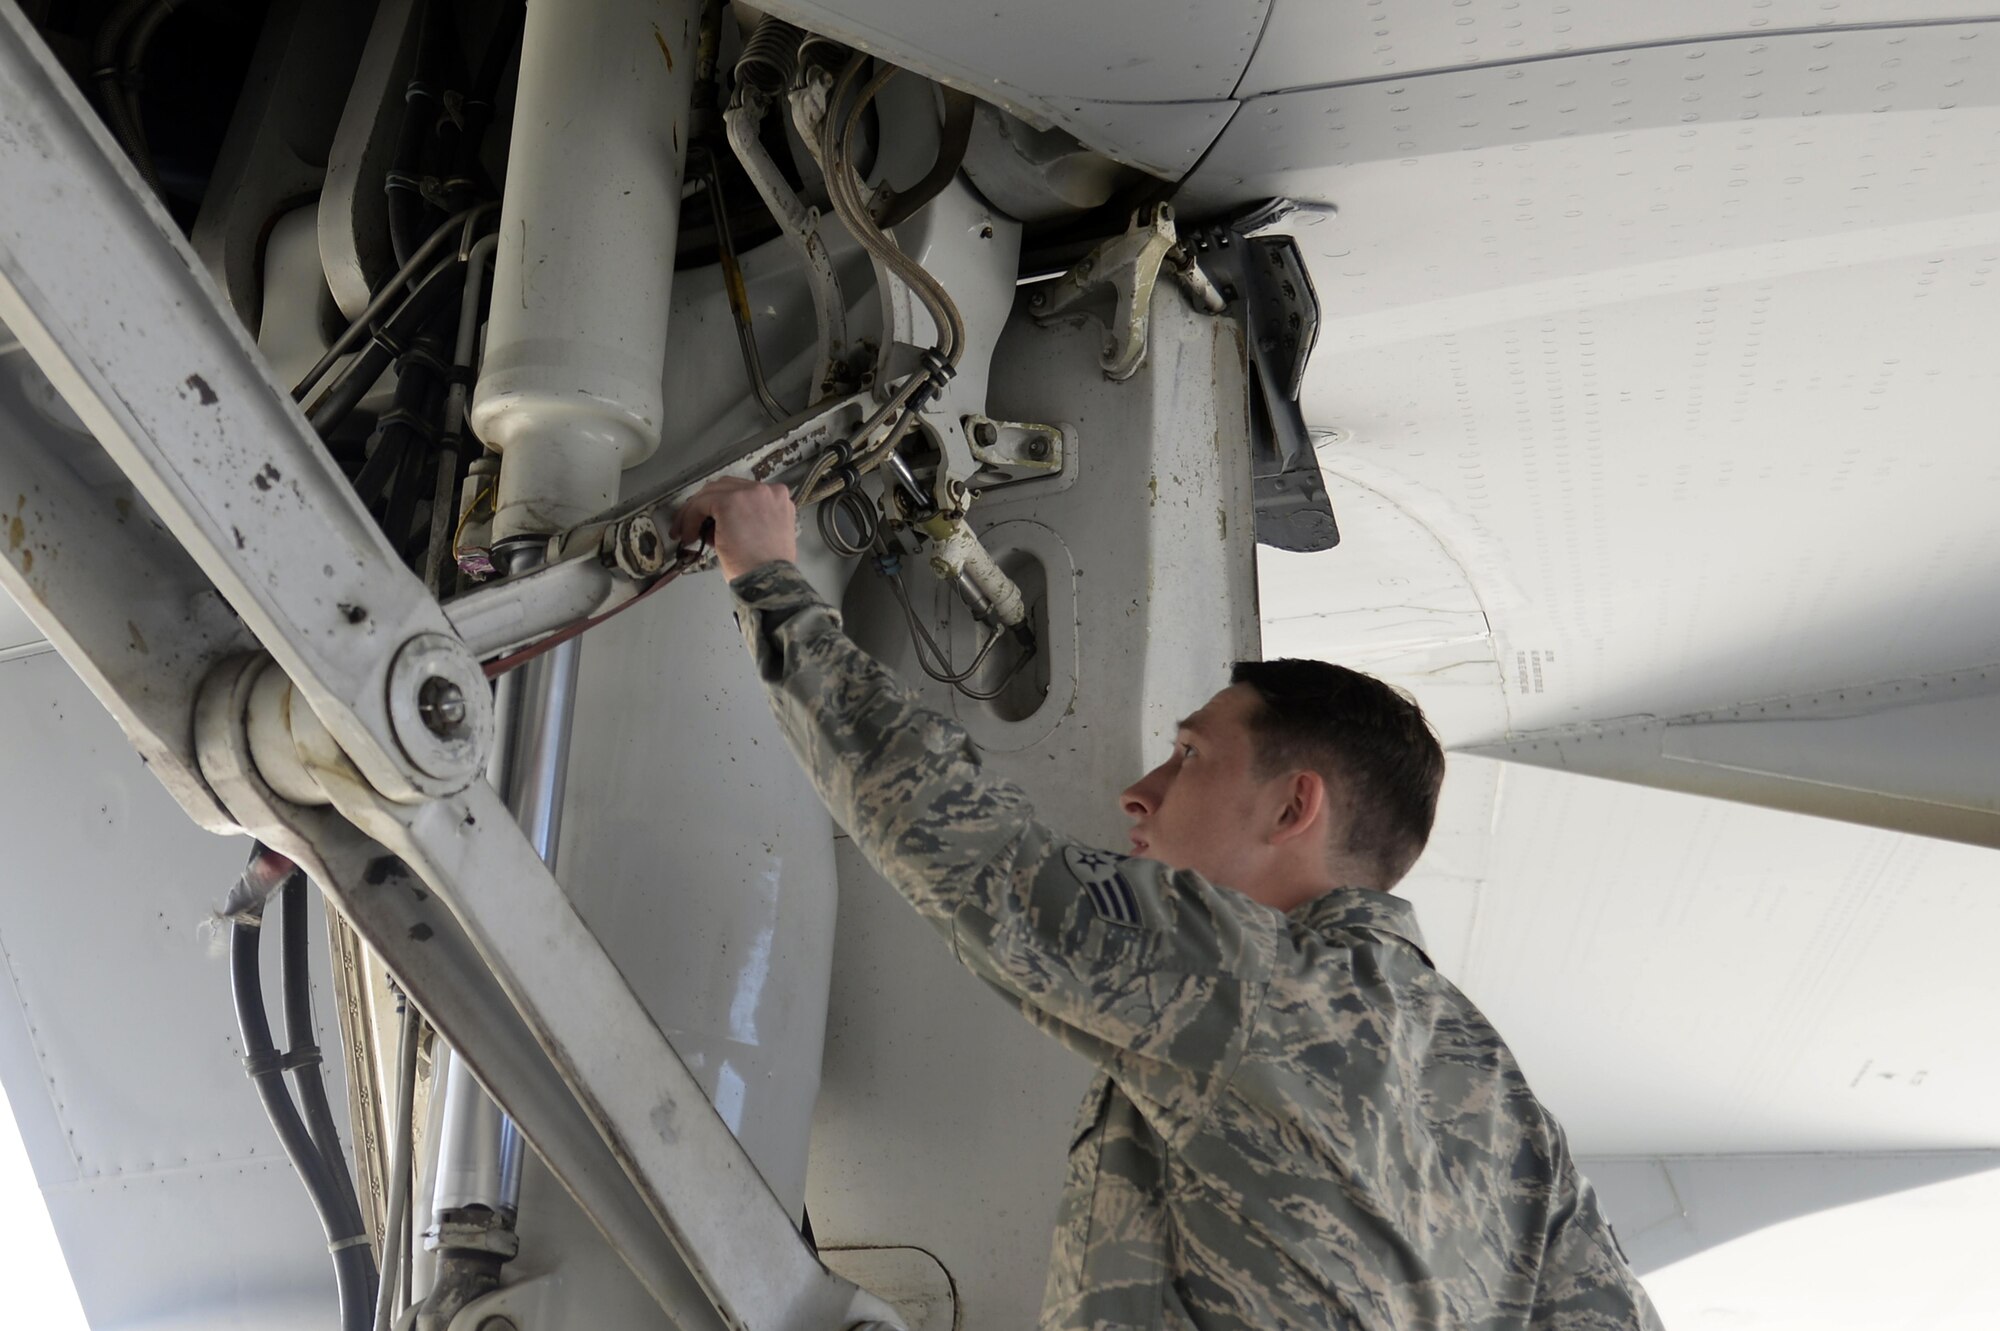 Senior Airman Will, KC-10 Extender instrument and flight control systems technician, preforms a preflight inspection on a KC-10 Extender at an undisclosed location in Southwest Asia Feb. 2, 2015. KC-10 Extenders deliver much-needed gas to help defend the nation, which begins with a hard-working team of Airmen consisting of crew chiefs and specialists. Will is deployed from Travis Air Force Base, Calif., and is a native of Glendale, Ariz. (U.S. Air Force photo/Tech. Sgt. Marie Brown)